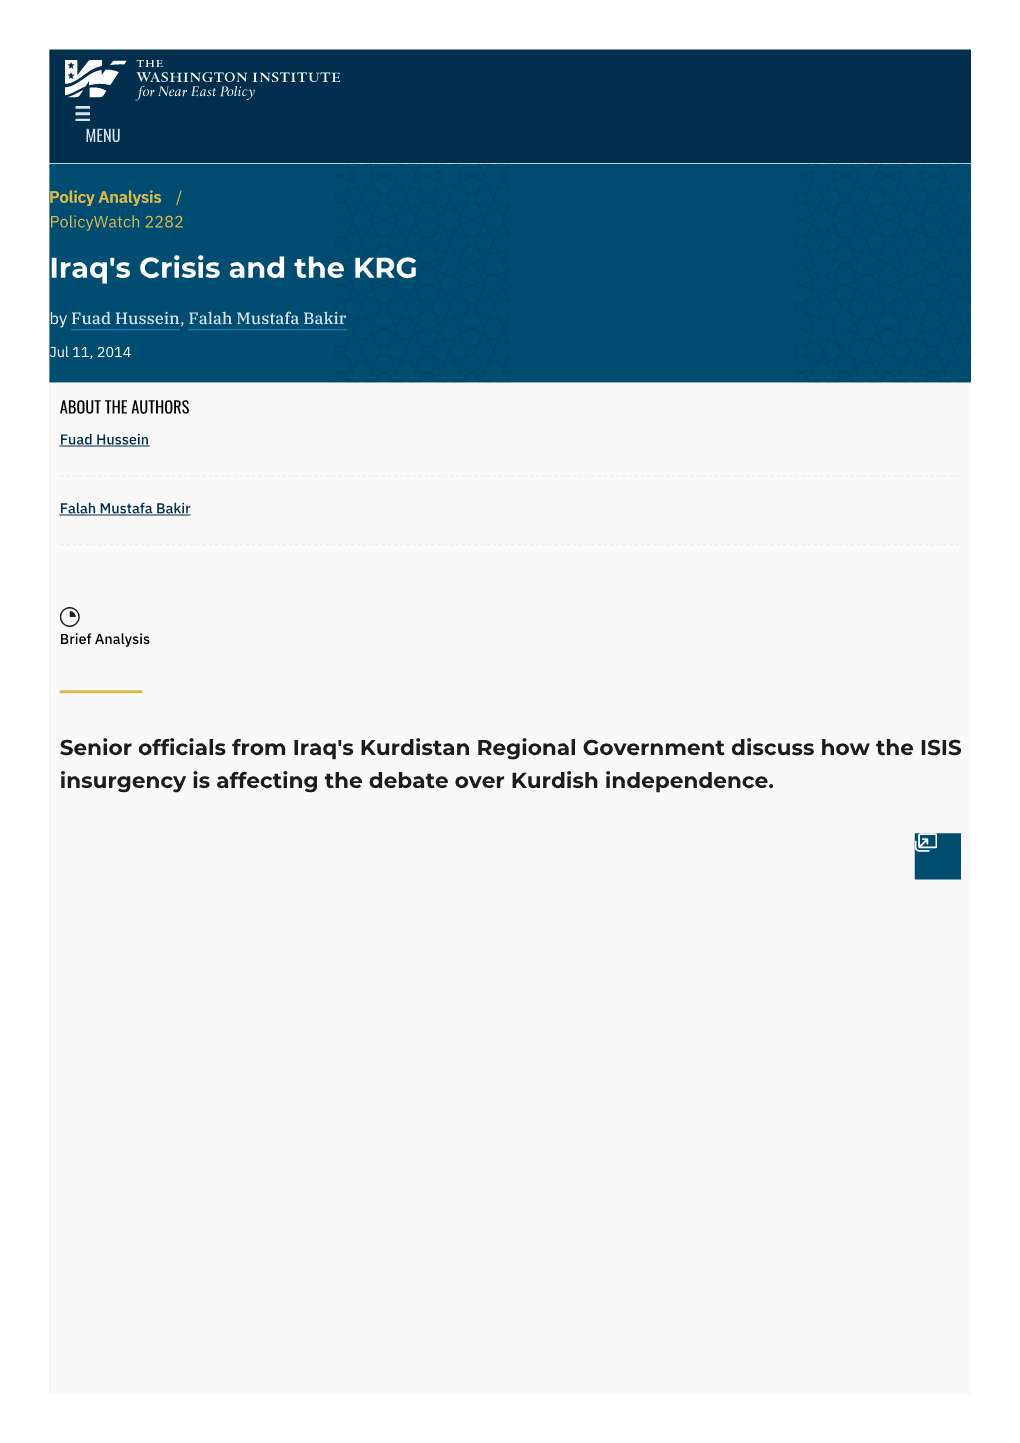 Iraq's Crisis and the KRG | the Washington Institute